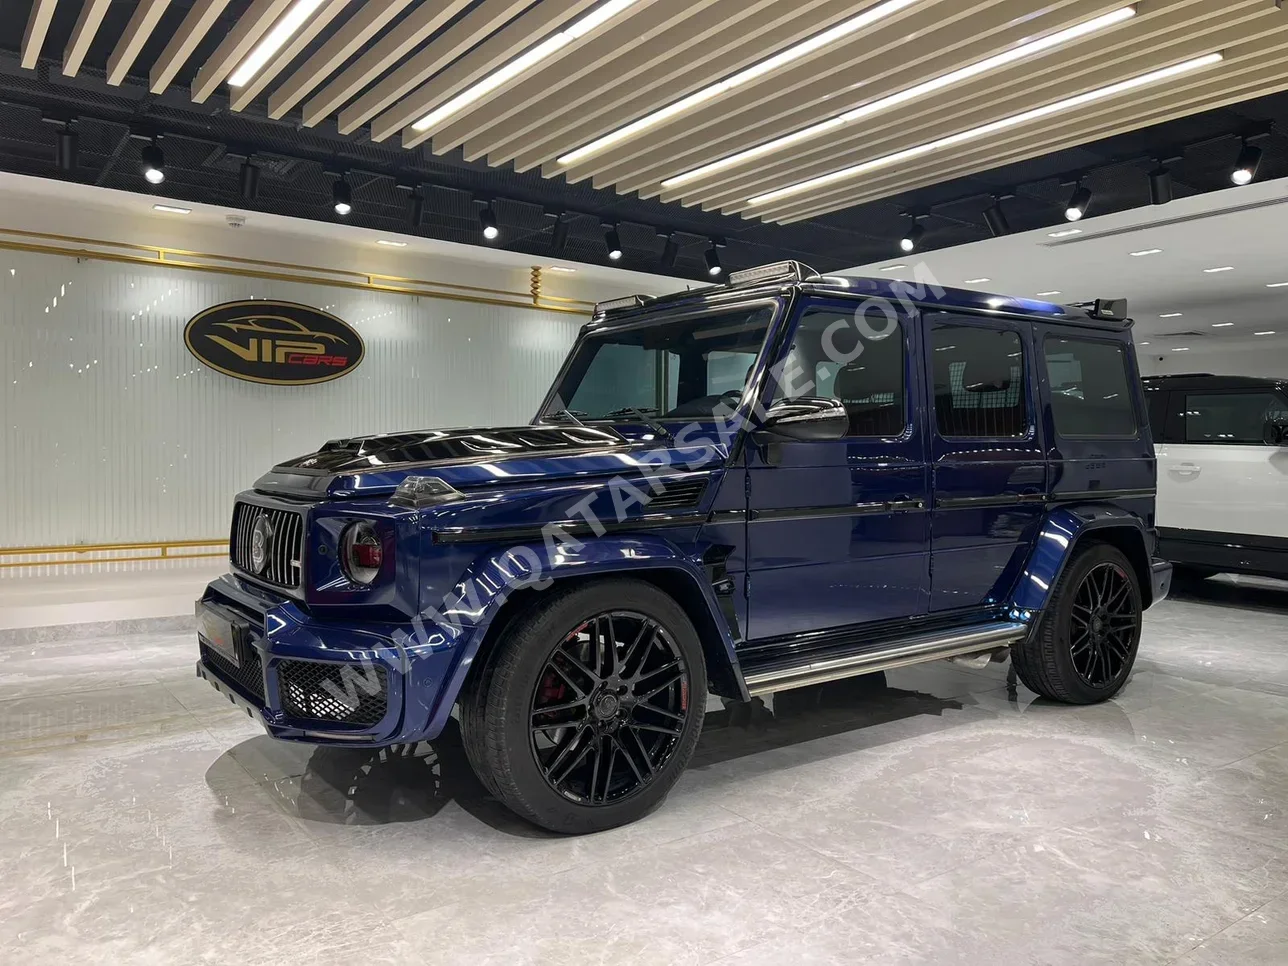  Mercedes-Benz  G-Class  55 Brabus  2010  Automatic  180,000 Km  8 Cylinder  Four Wheel Drive (4WD)  SUV  Blue  With Warranty